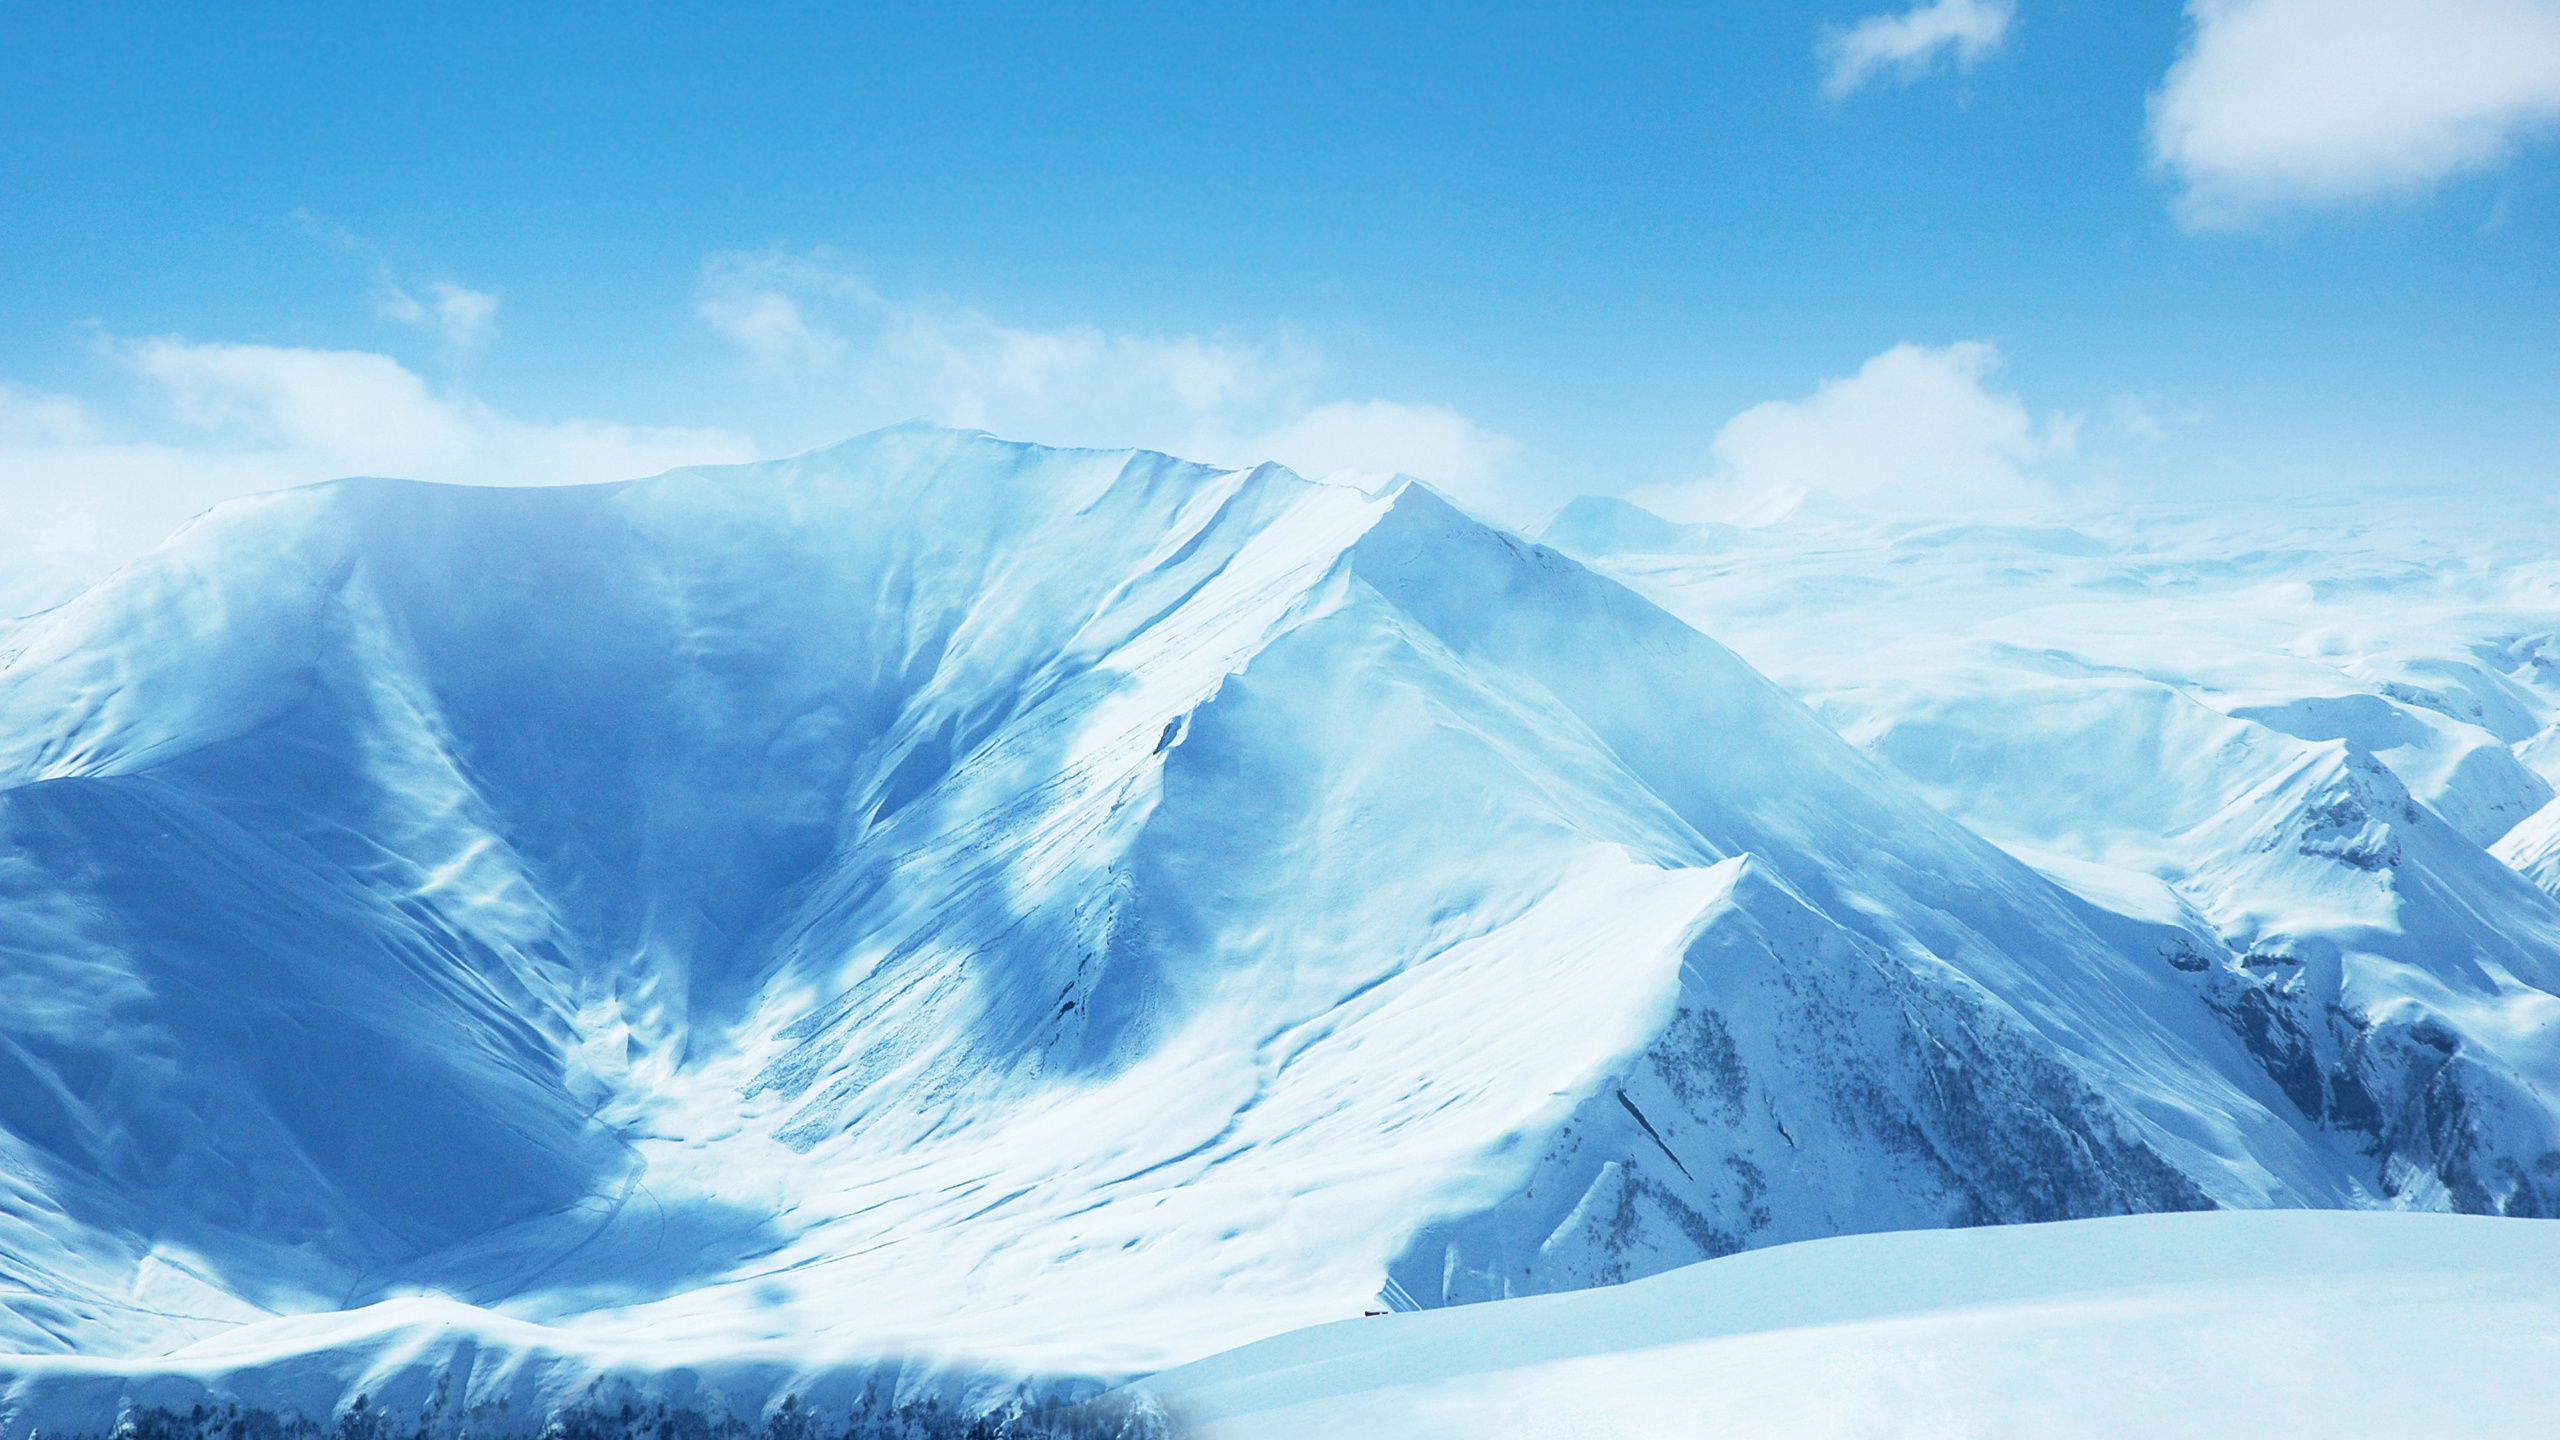 Snow Covered Mountain Under Blue Sky. Wallpaper in 2560x1440 Resolution